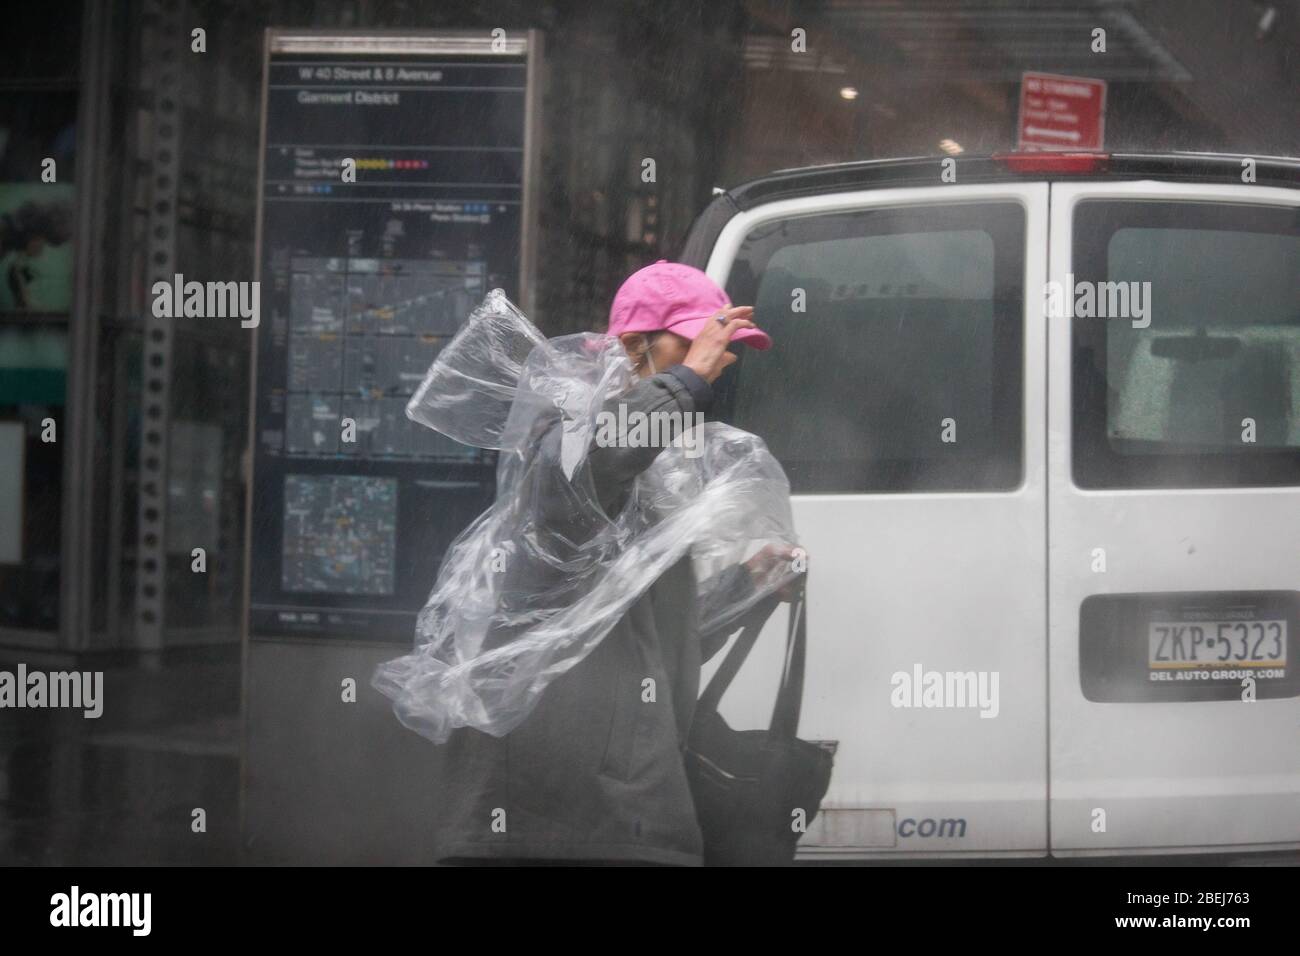 New York, USA. 13th Apr, 2020. A pedestrian wearing a plastic raincoat walks against the wind at the Times Square neighborhood in New York, the United States, April 13, 2020. Strong wind and rain hit New York on Monday. Credit: Michael Nagle/Xinhua/Alamy Live News Stock Photo